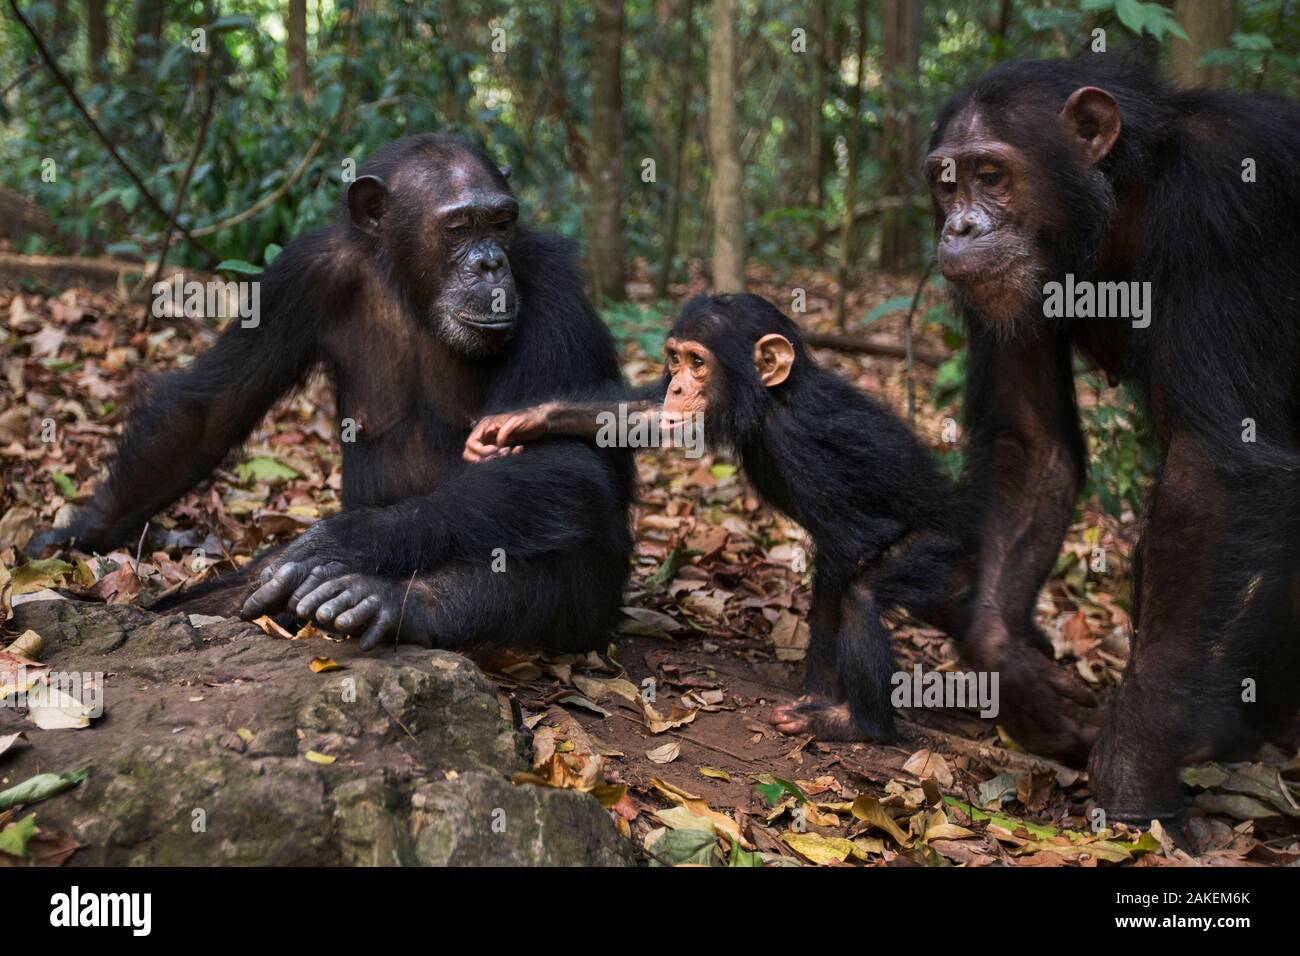 Eastern chimpanzee  (Pan troglodytes schweinfurtheii) female 'Gaia' aged 20 years with her sister 'Golden' aged 15 years and niece 'Glamour' aged 2 years.Gombe National Park, Tanzania. September 2013. Stock Photo